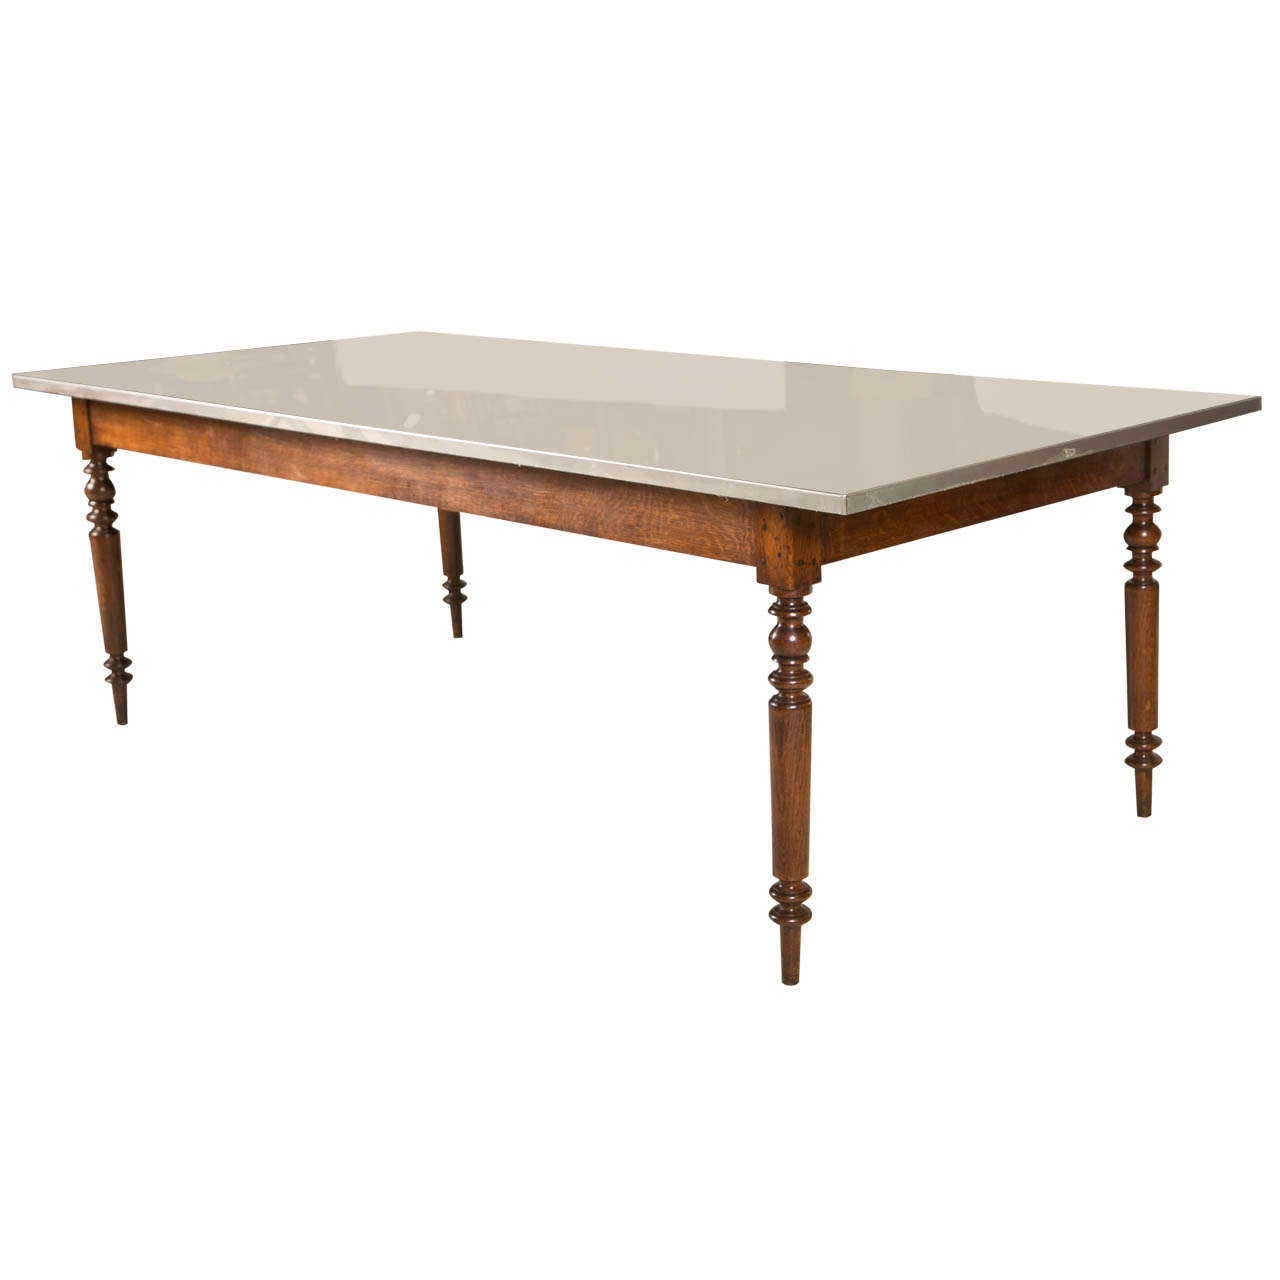 Oak and Chestnut french table with Stainless Steel Top